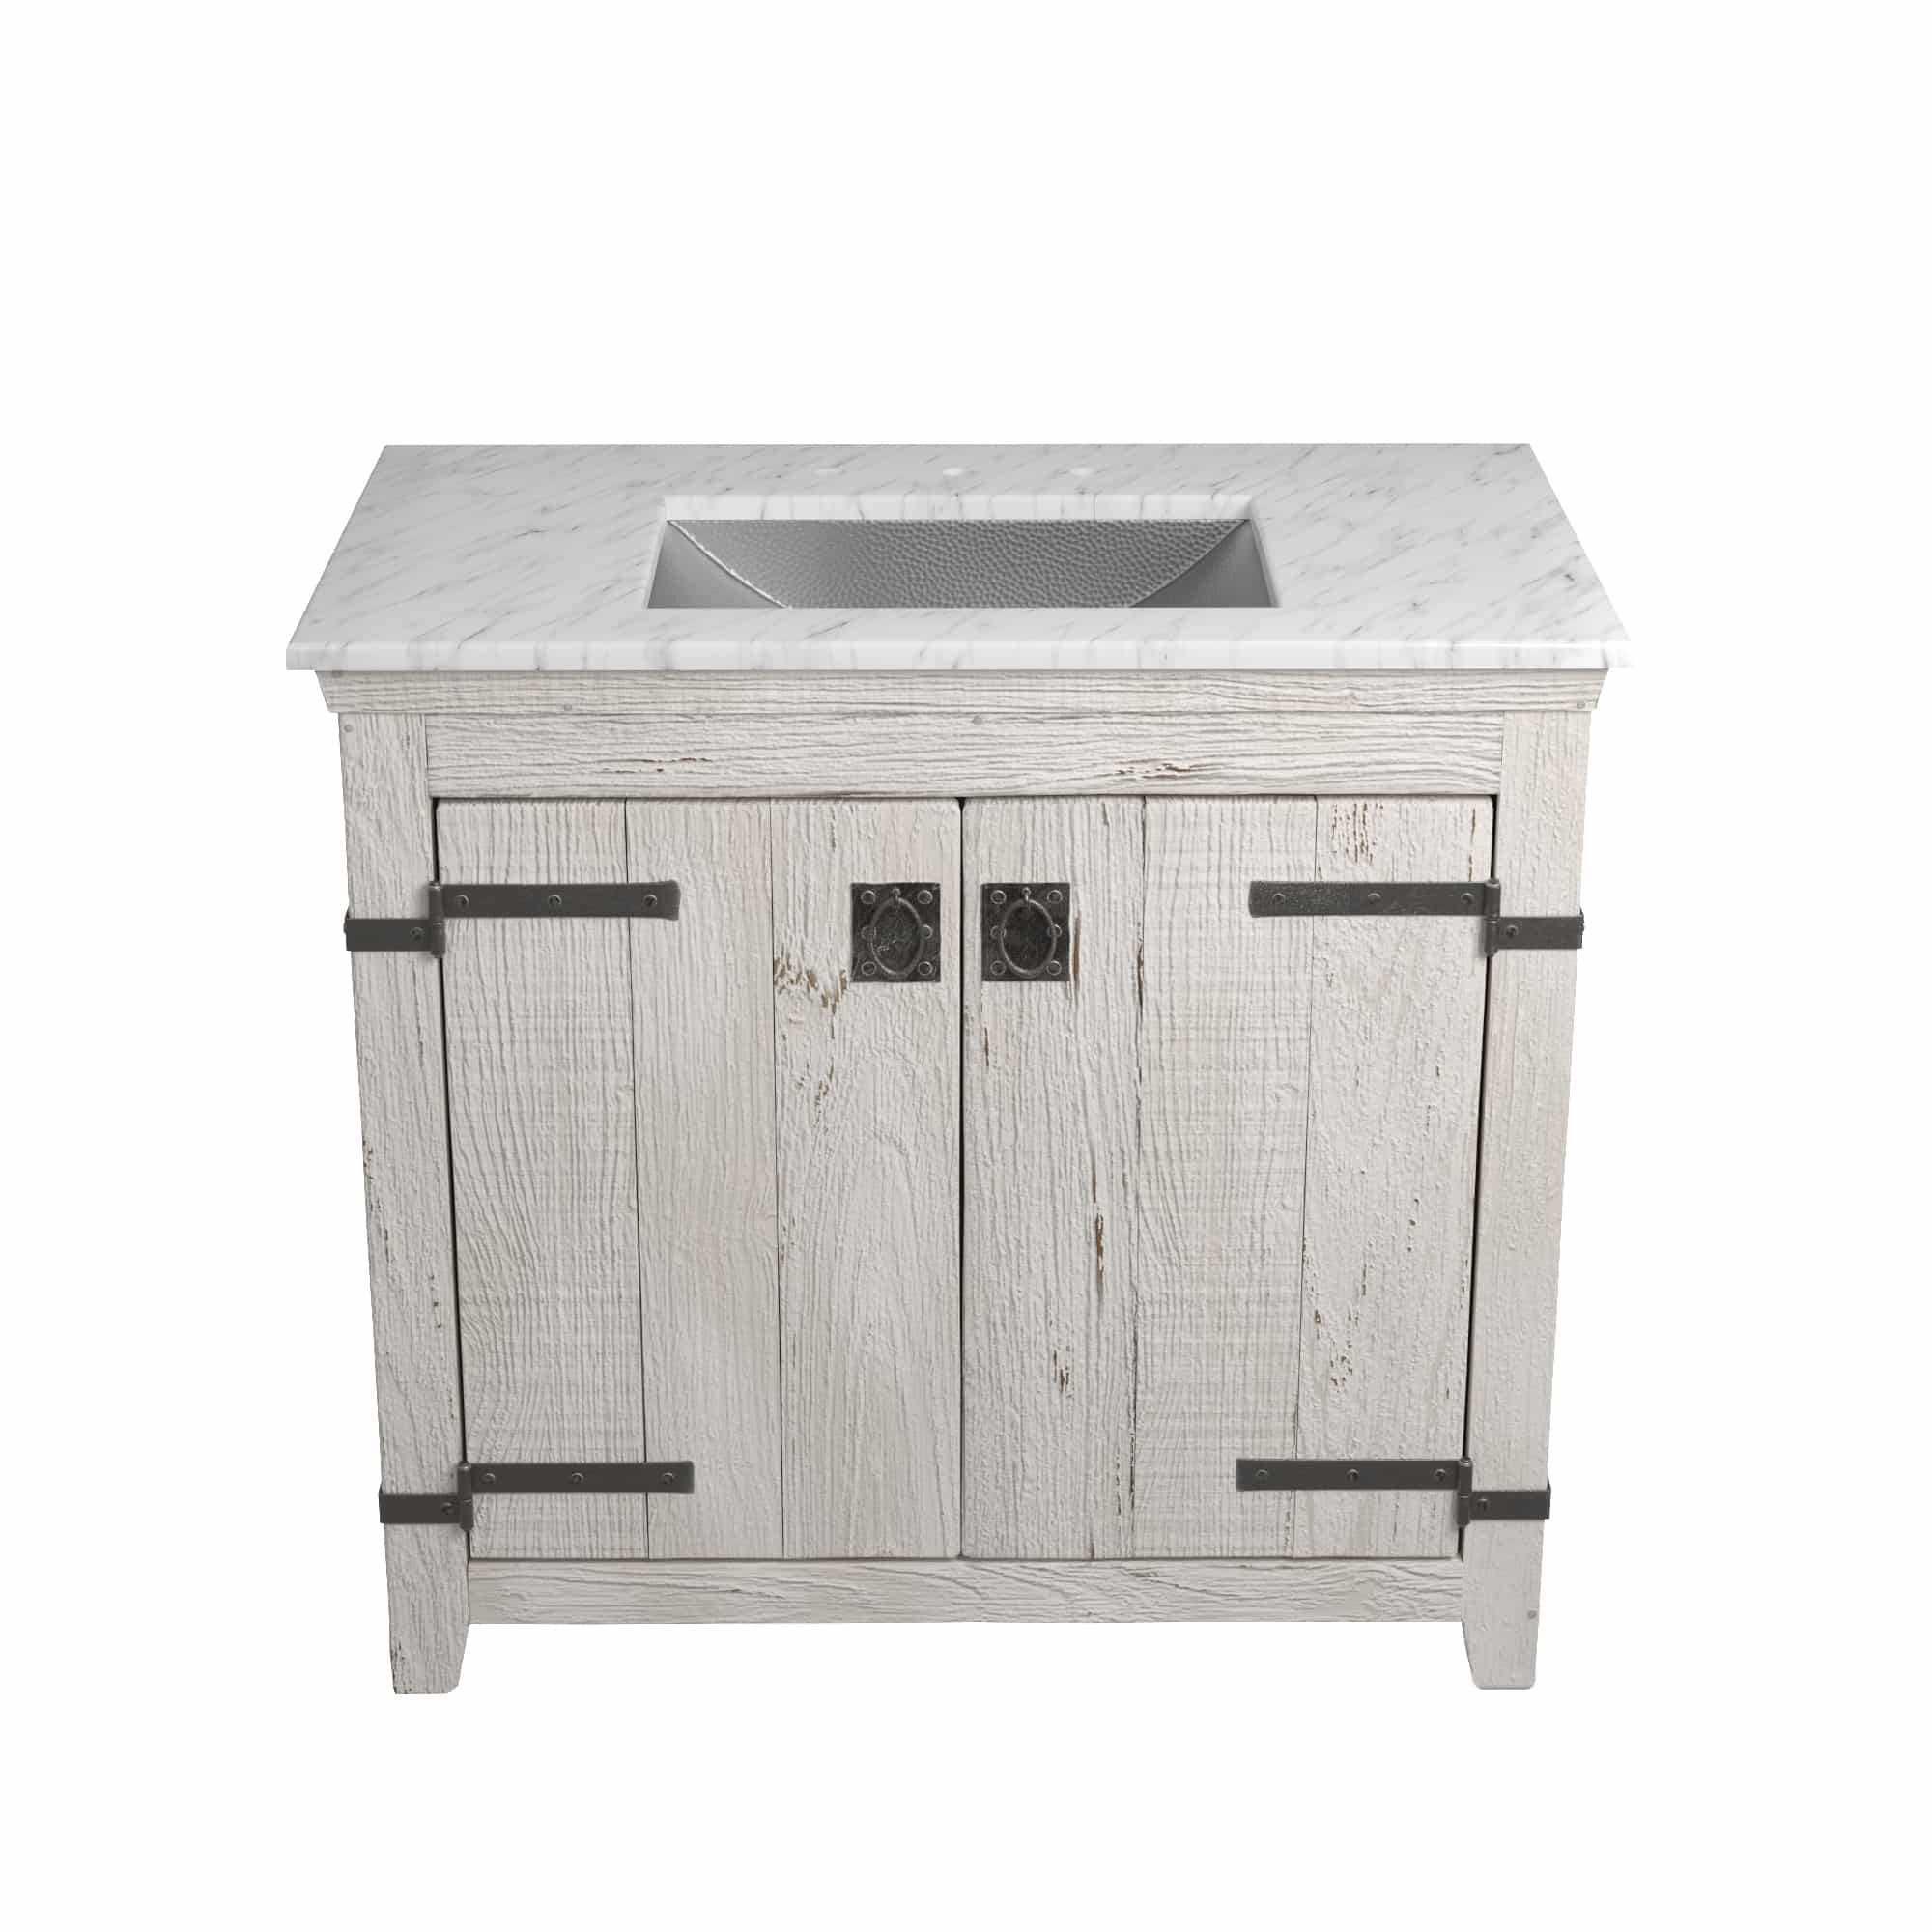 Native Trails 36" Americana Vanity in Whitewash with Carrara Marble Top and Avila in Brushed Nickel, 8" Widespread Faucet Holes, BND36-VB-CT-CP-018